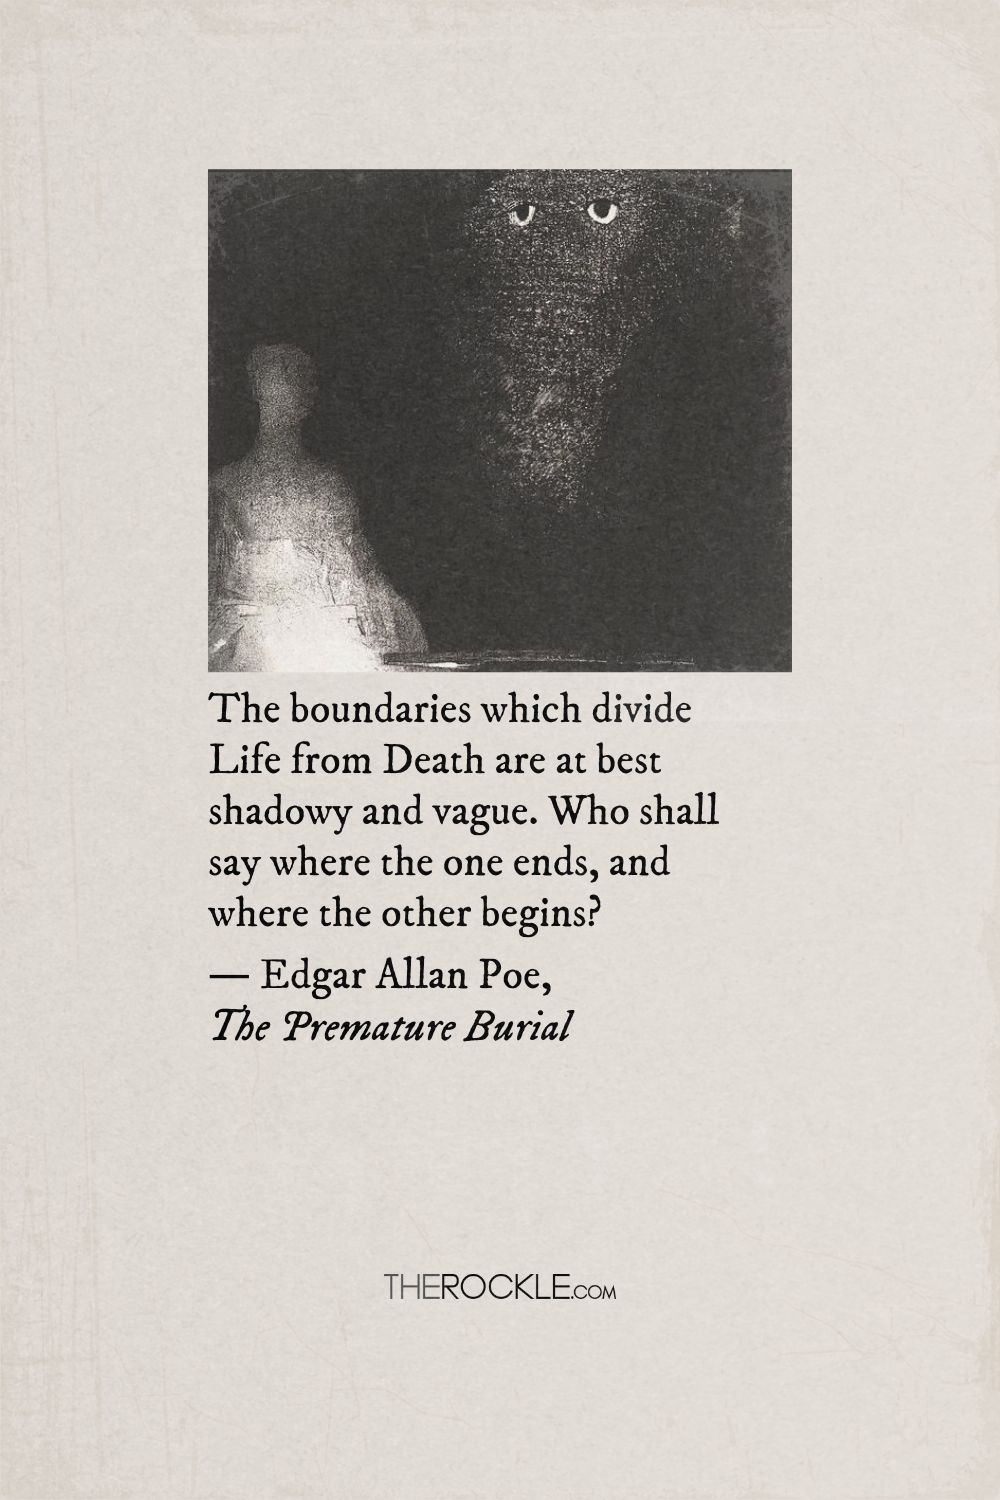 Quote from Edgar Allan Poe's story The Premature Burial